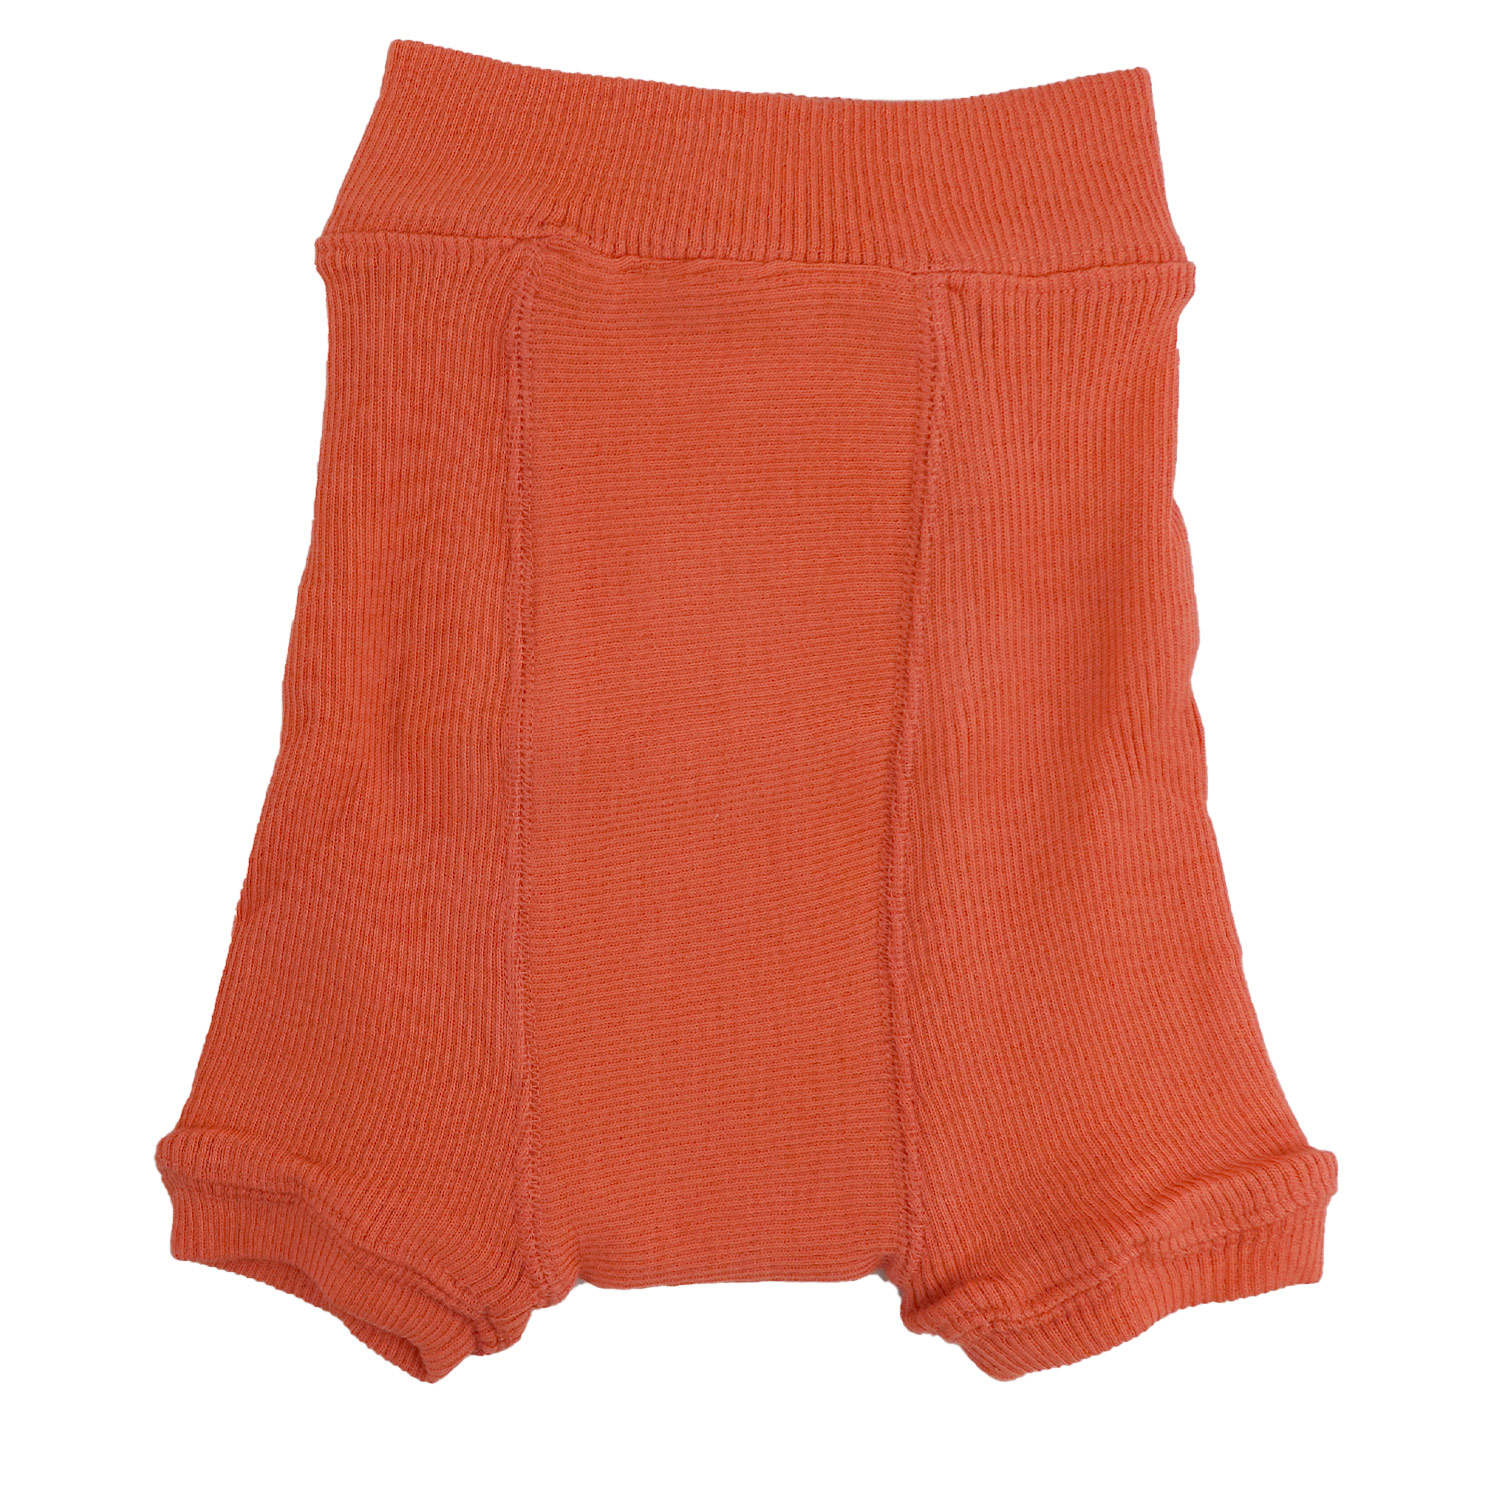 ManyMonths Shorties aus Wolle